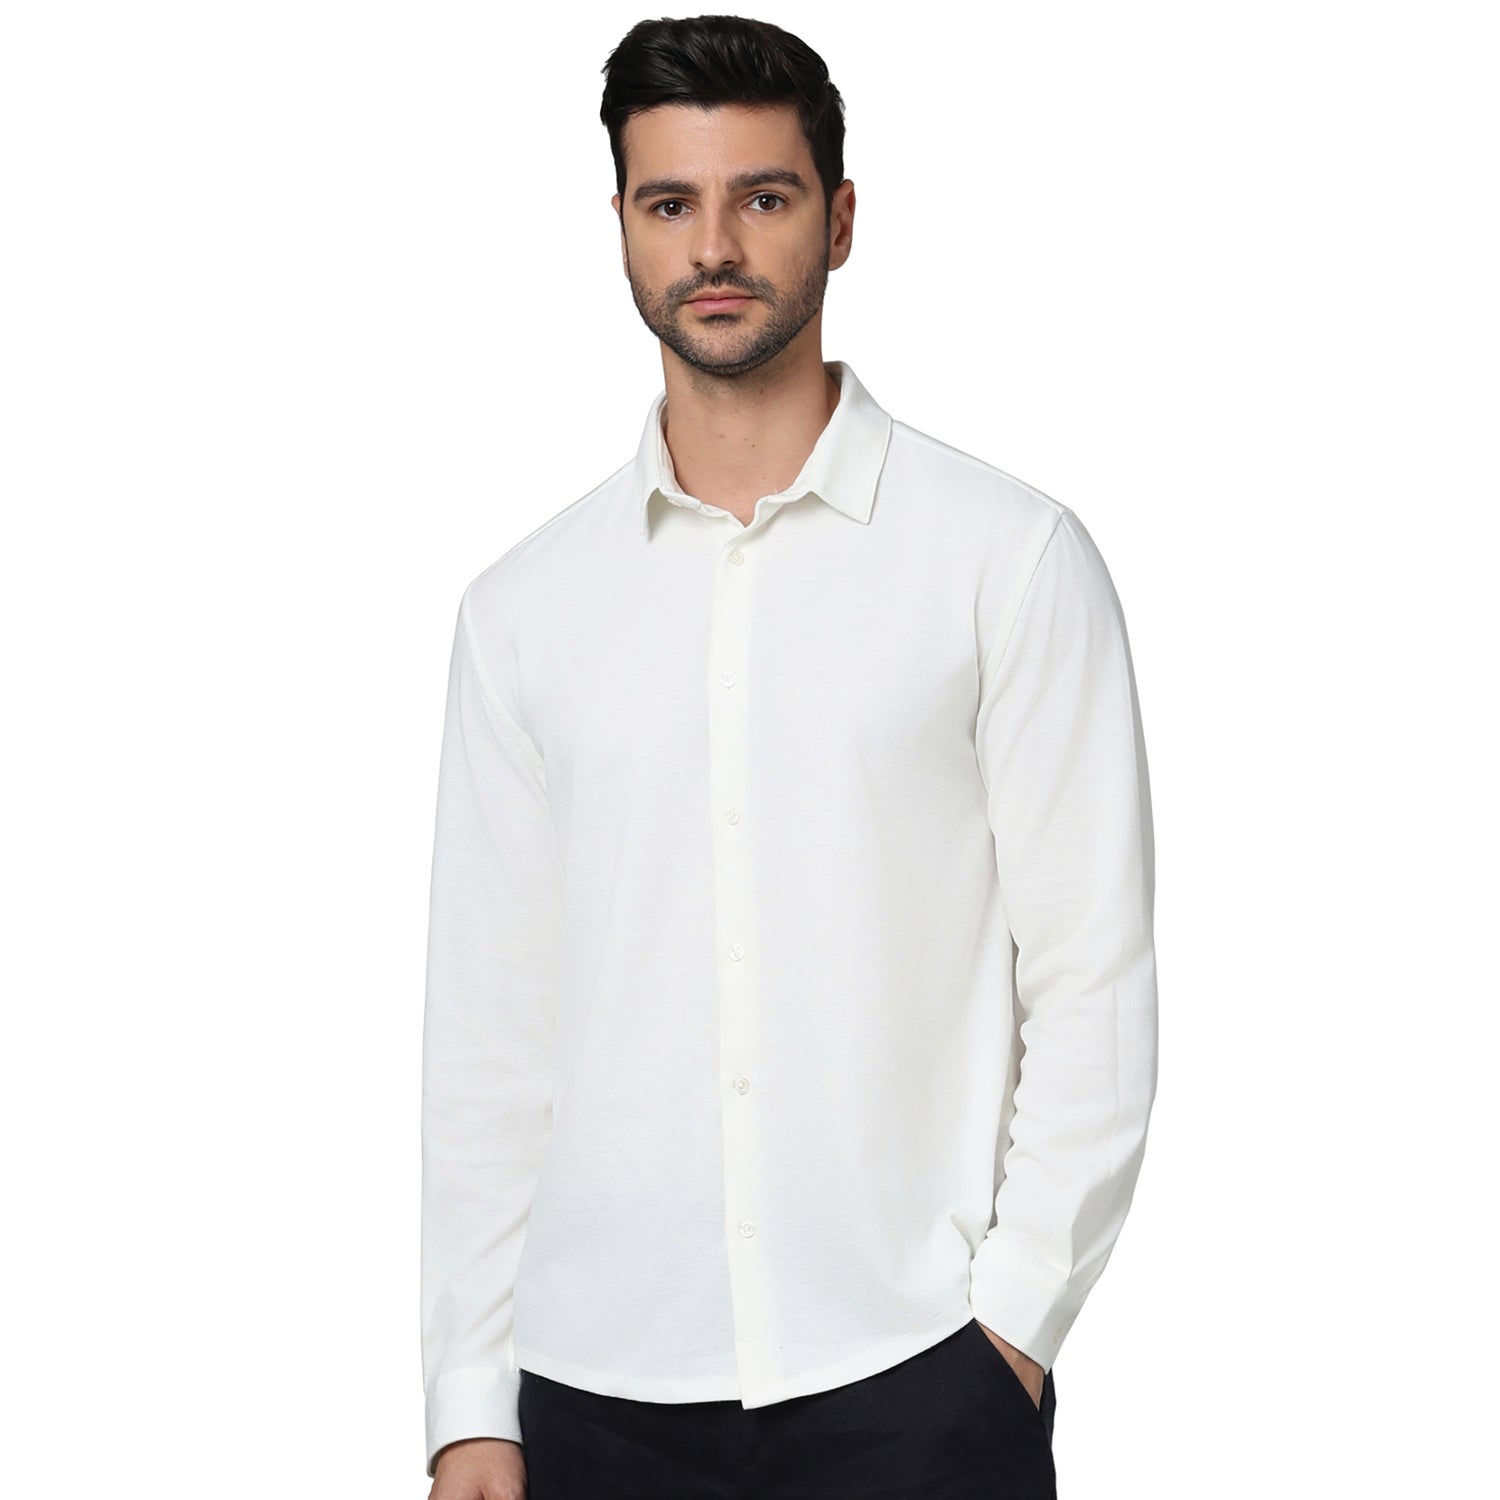 Men's White Spread Collar Solid Regular Fit Polyester Casual Shirts (GAWAFFLE)